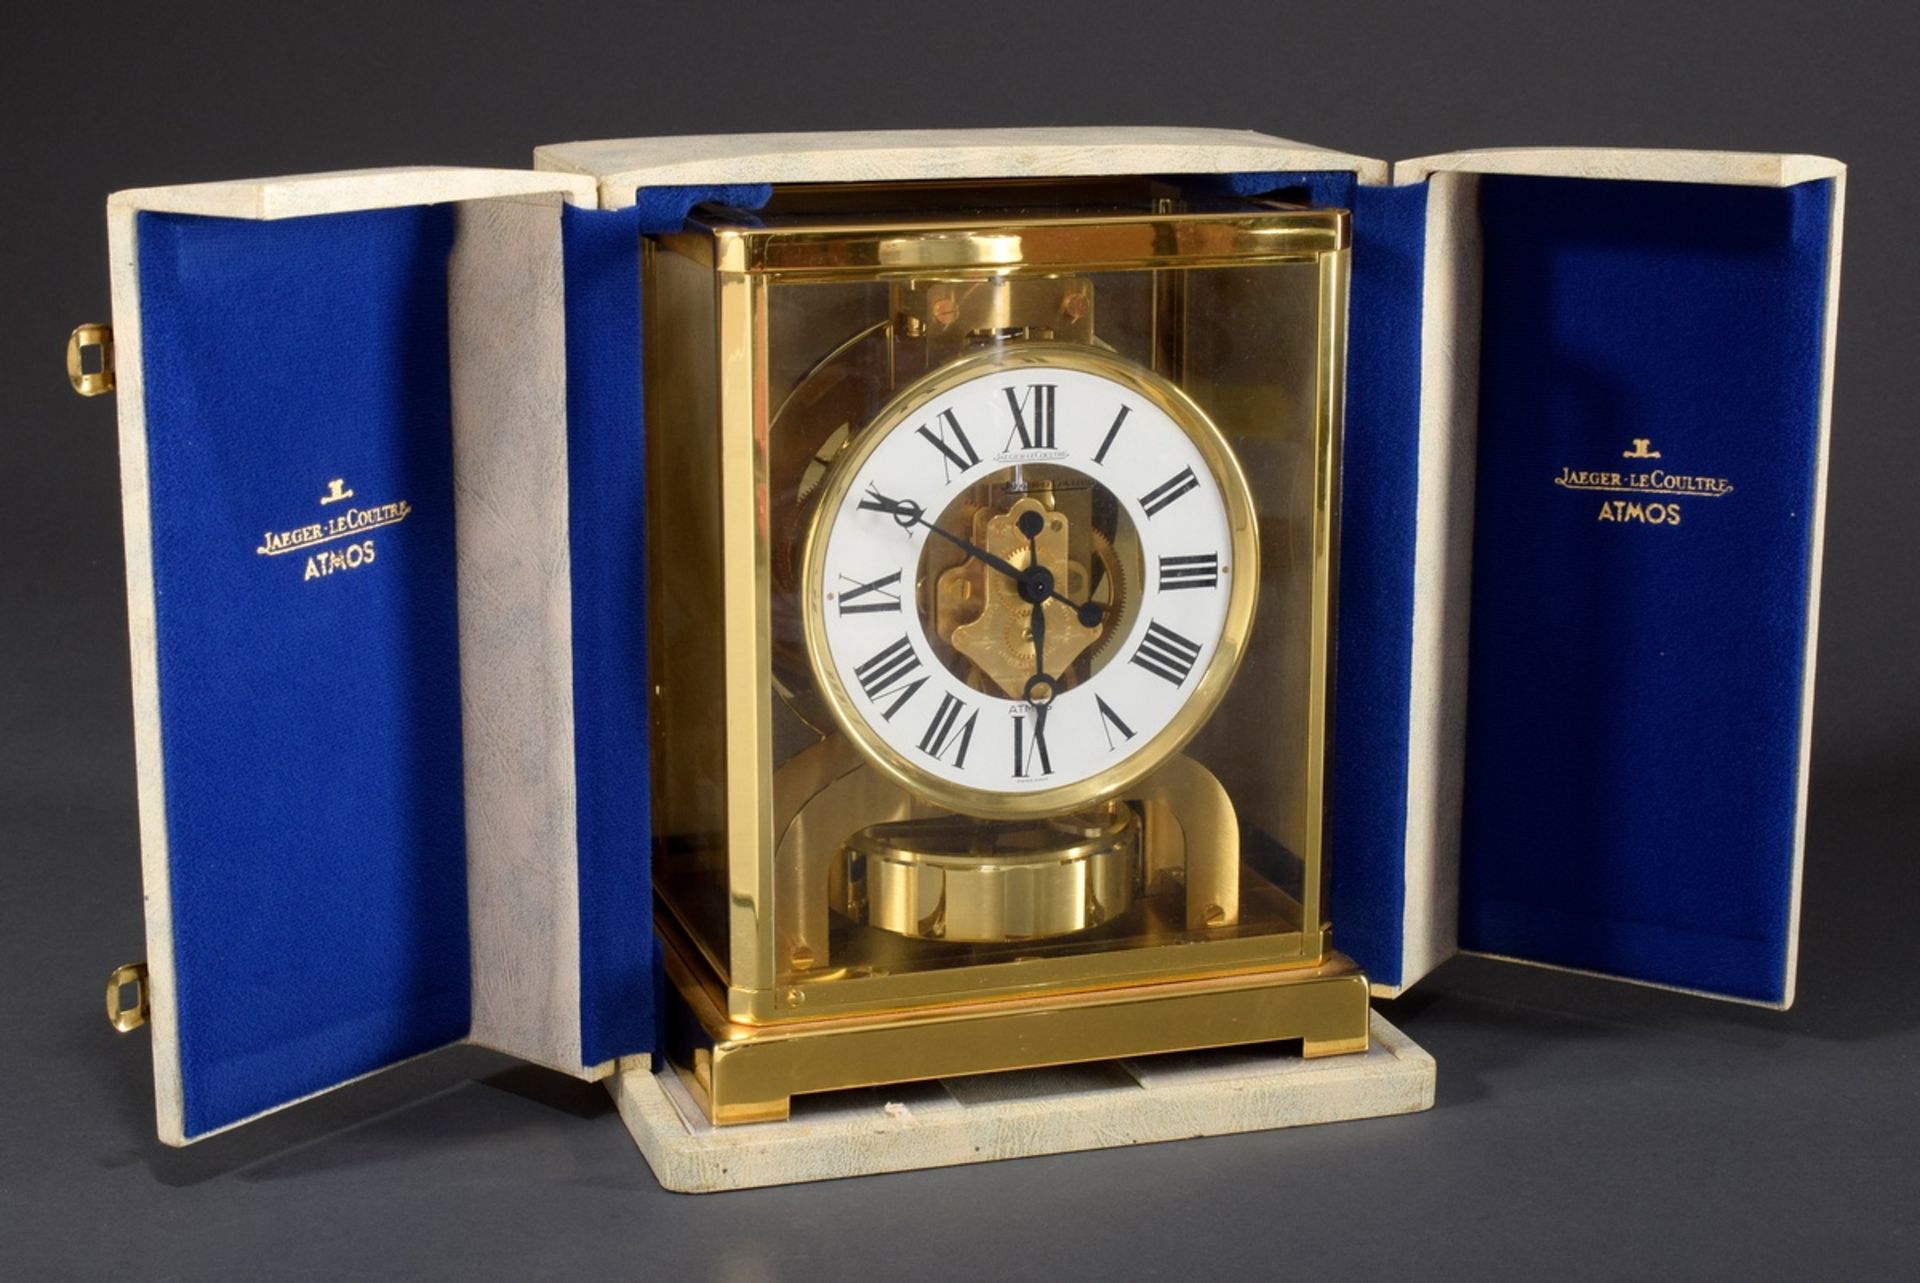 Jaeger LeCoultre "Atmos Classic" Tischuhr mit To | Jaeger LeCoultre "Atmos Classic" table clock wit